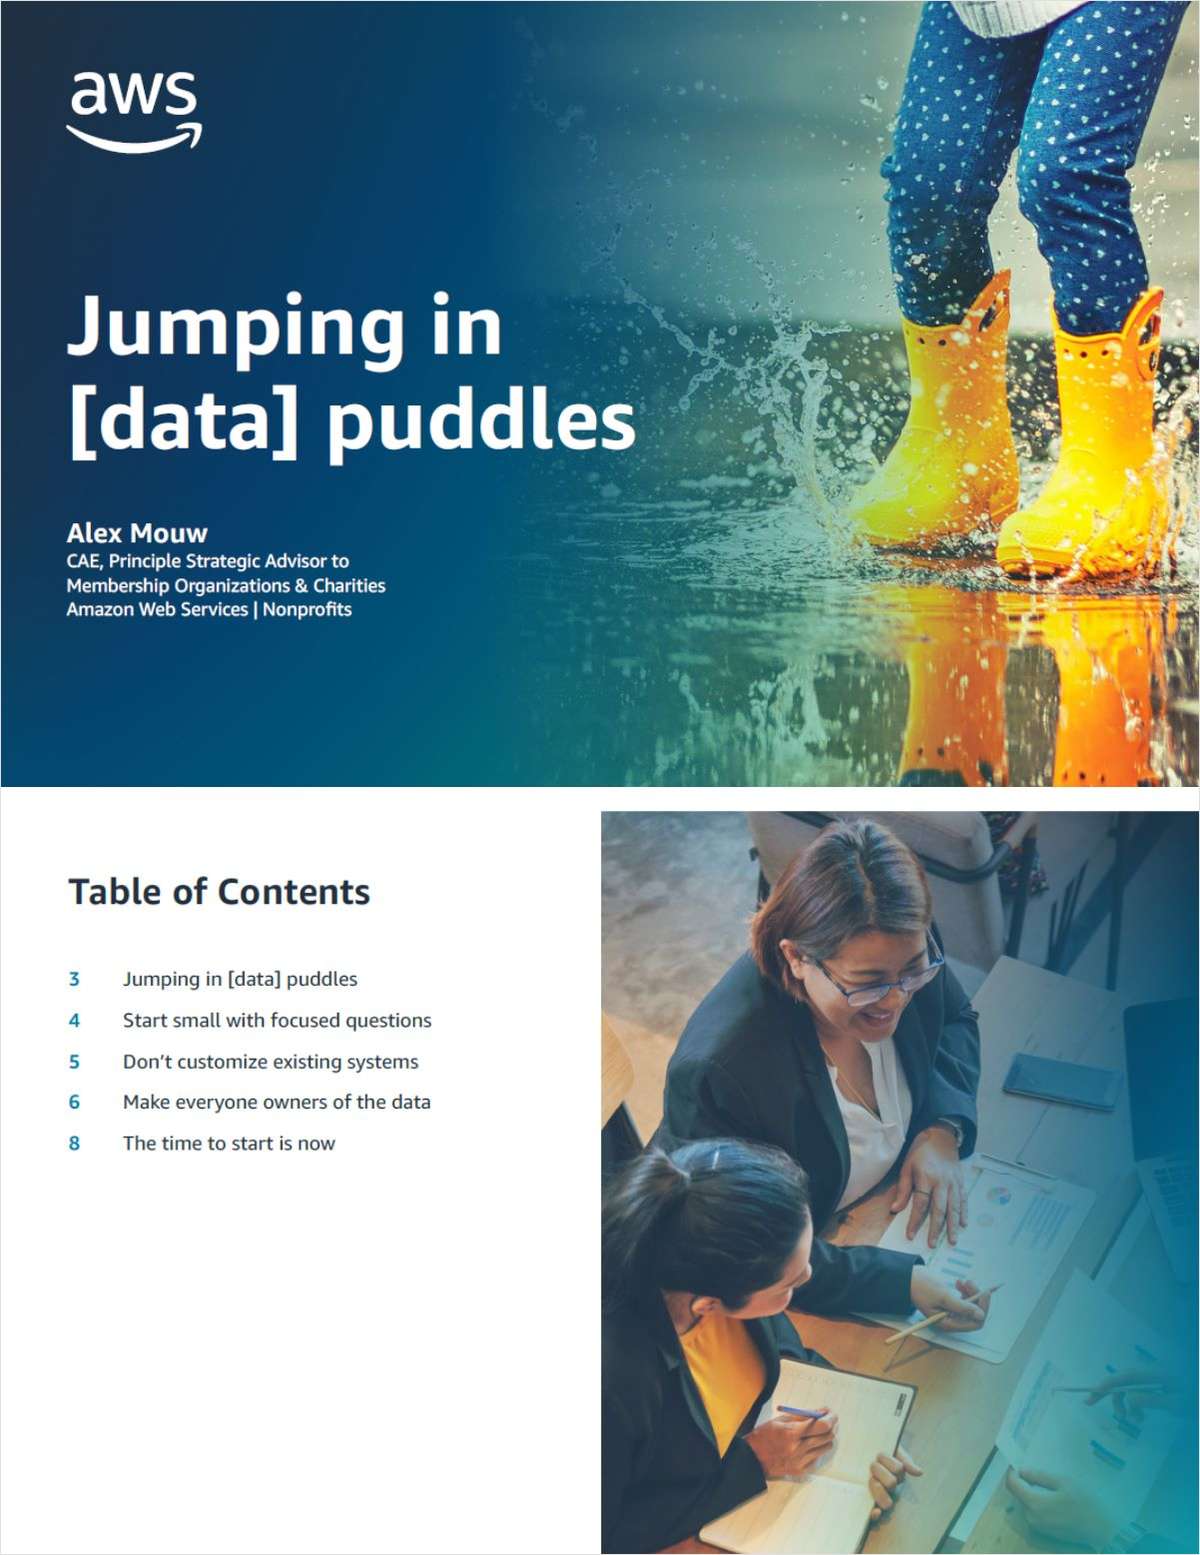 Jumping in Data Puddles